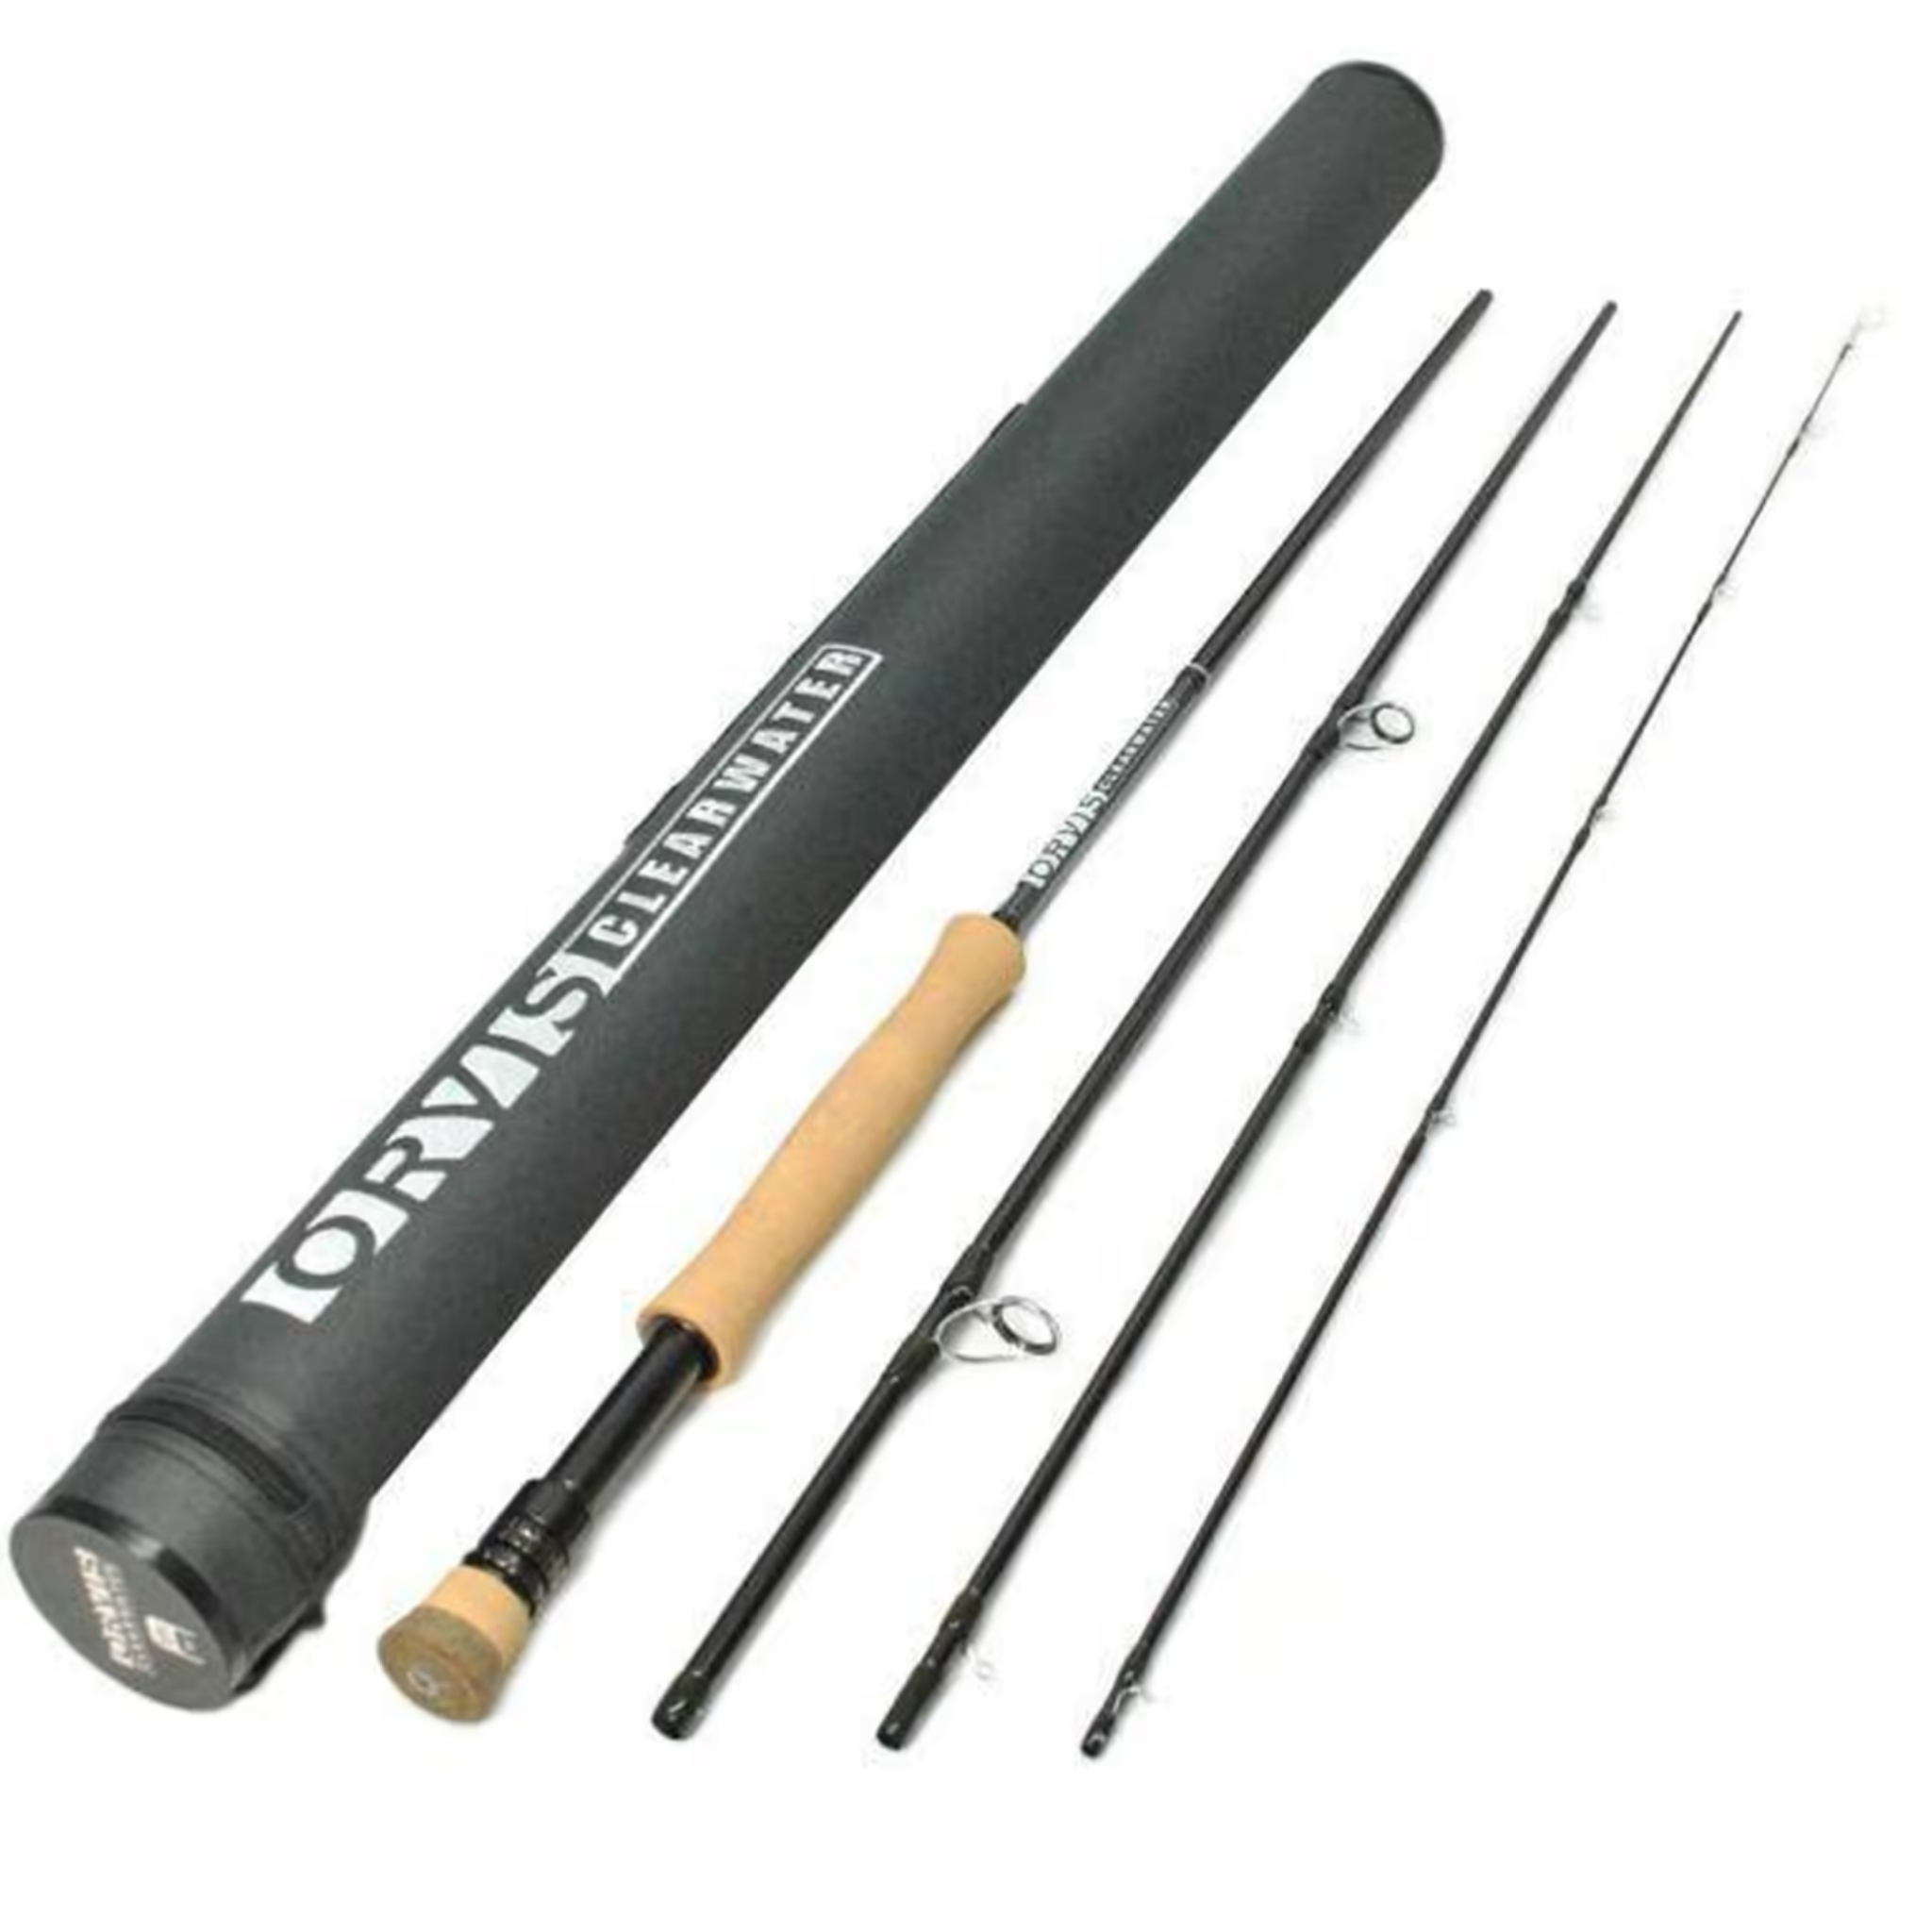 Orvis Fly Fishing Rods / FREE STANDARD US SHIPPING / Orvis Encounter 9 Foot  8 Weight Fly Rod / Reel Outfit